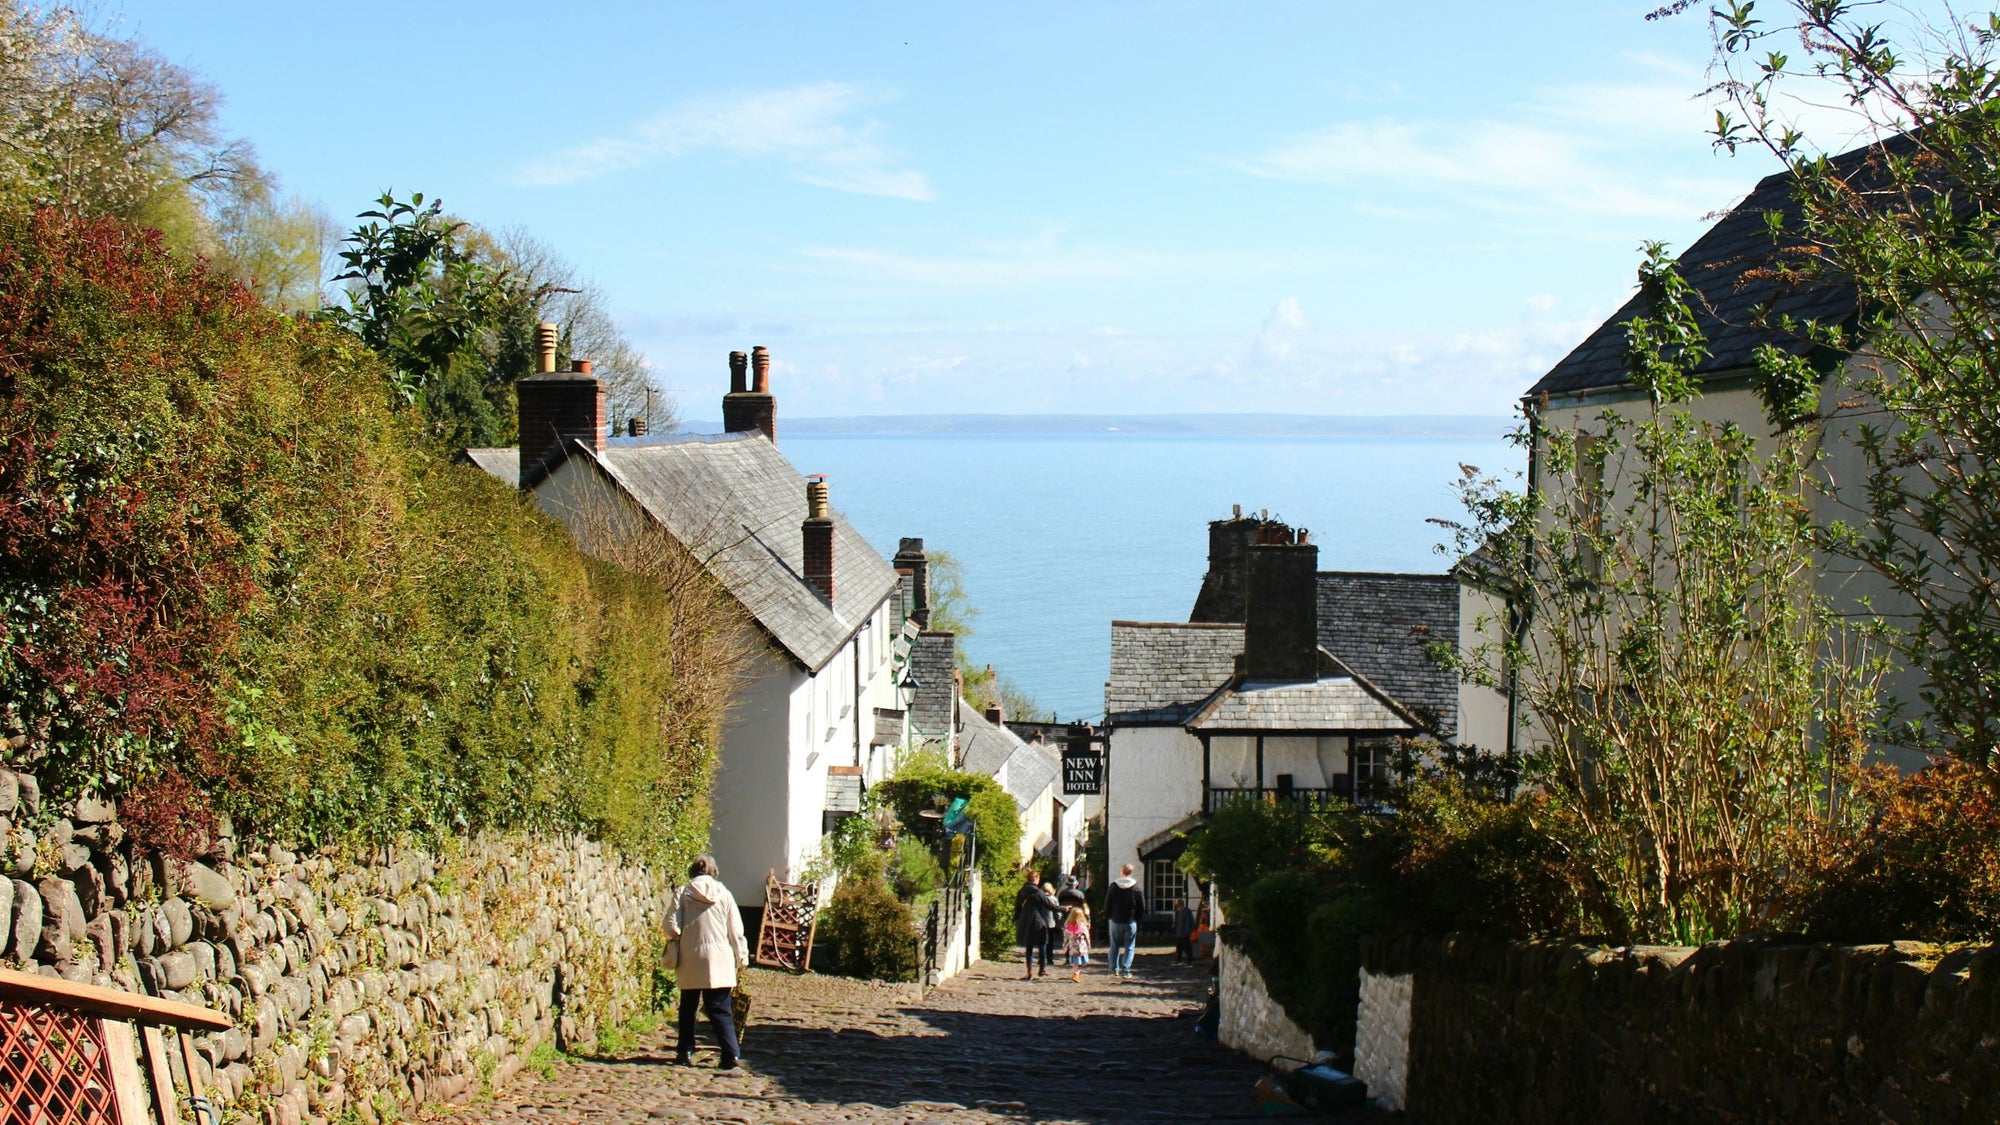 The Clovelly Collection